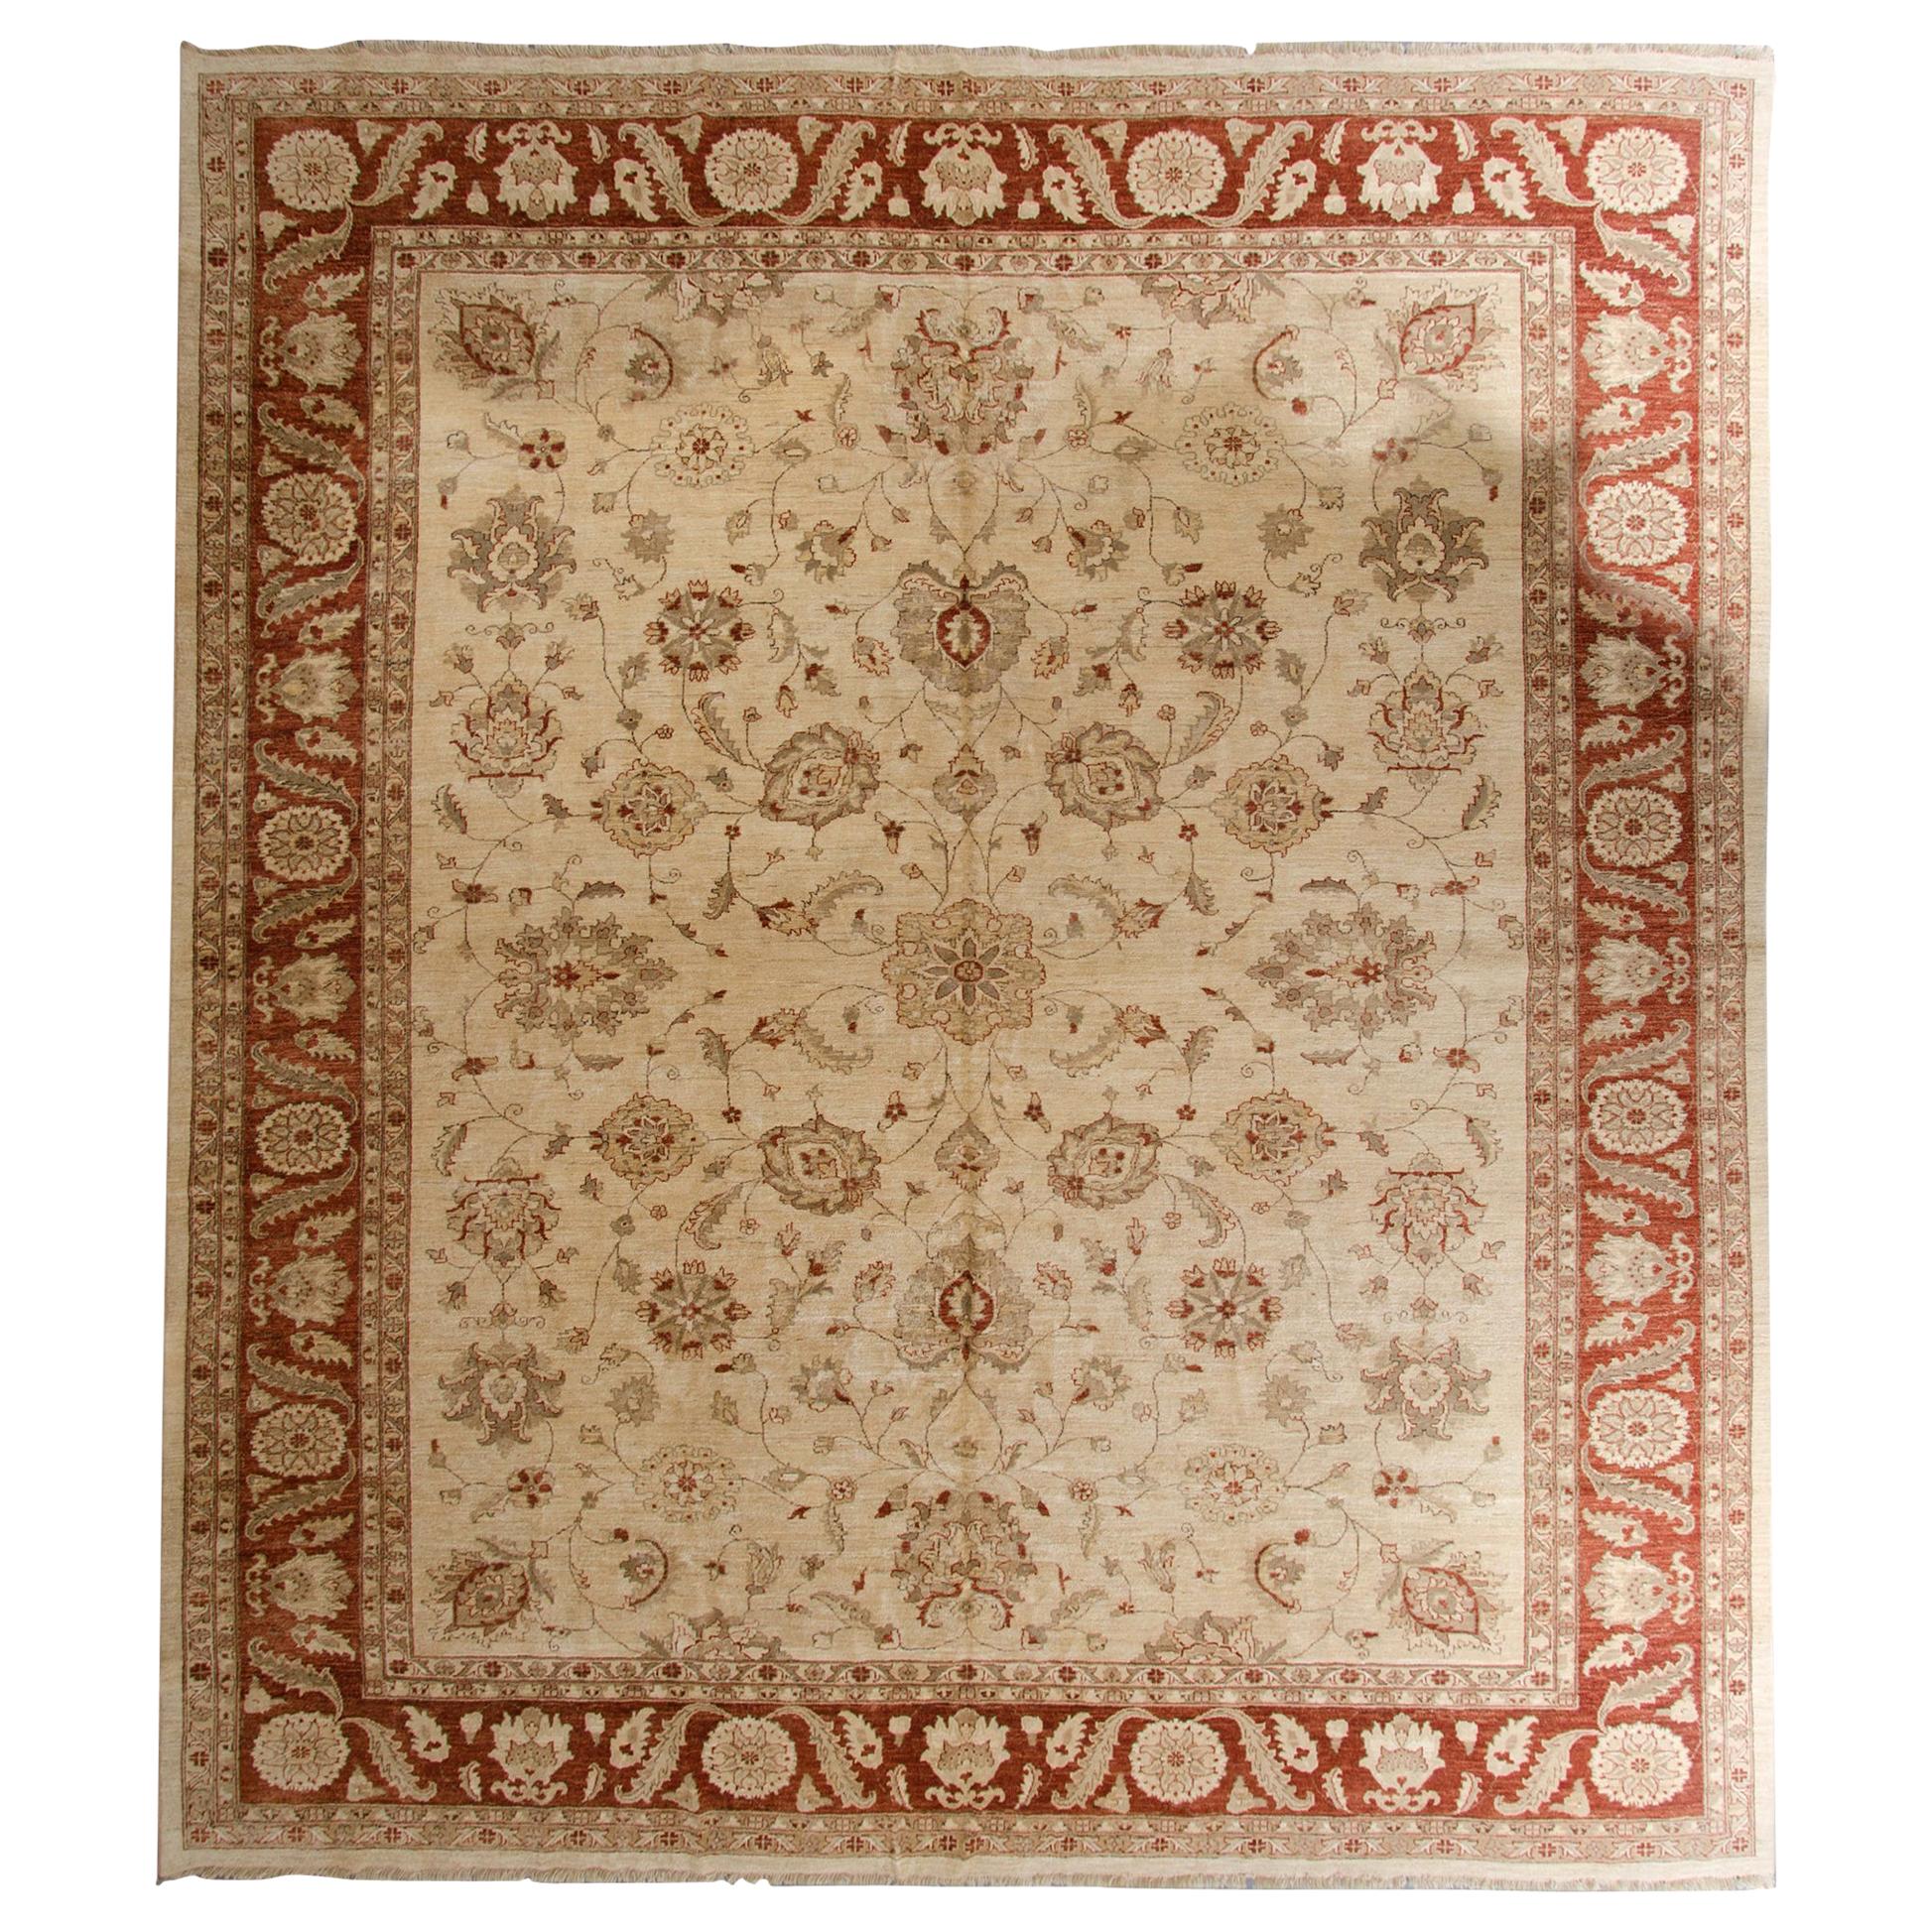 Traditional Ziegler Style Design Carpet, Red and Cream Wool Large Area Rug